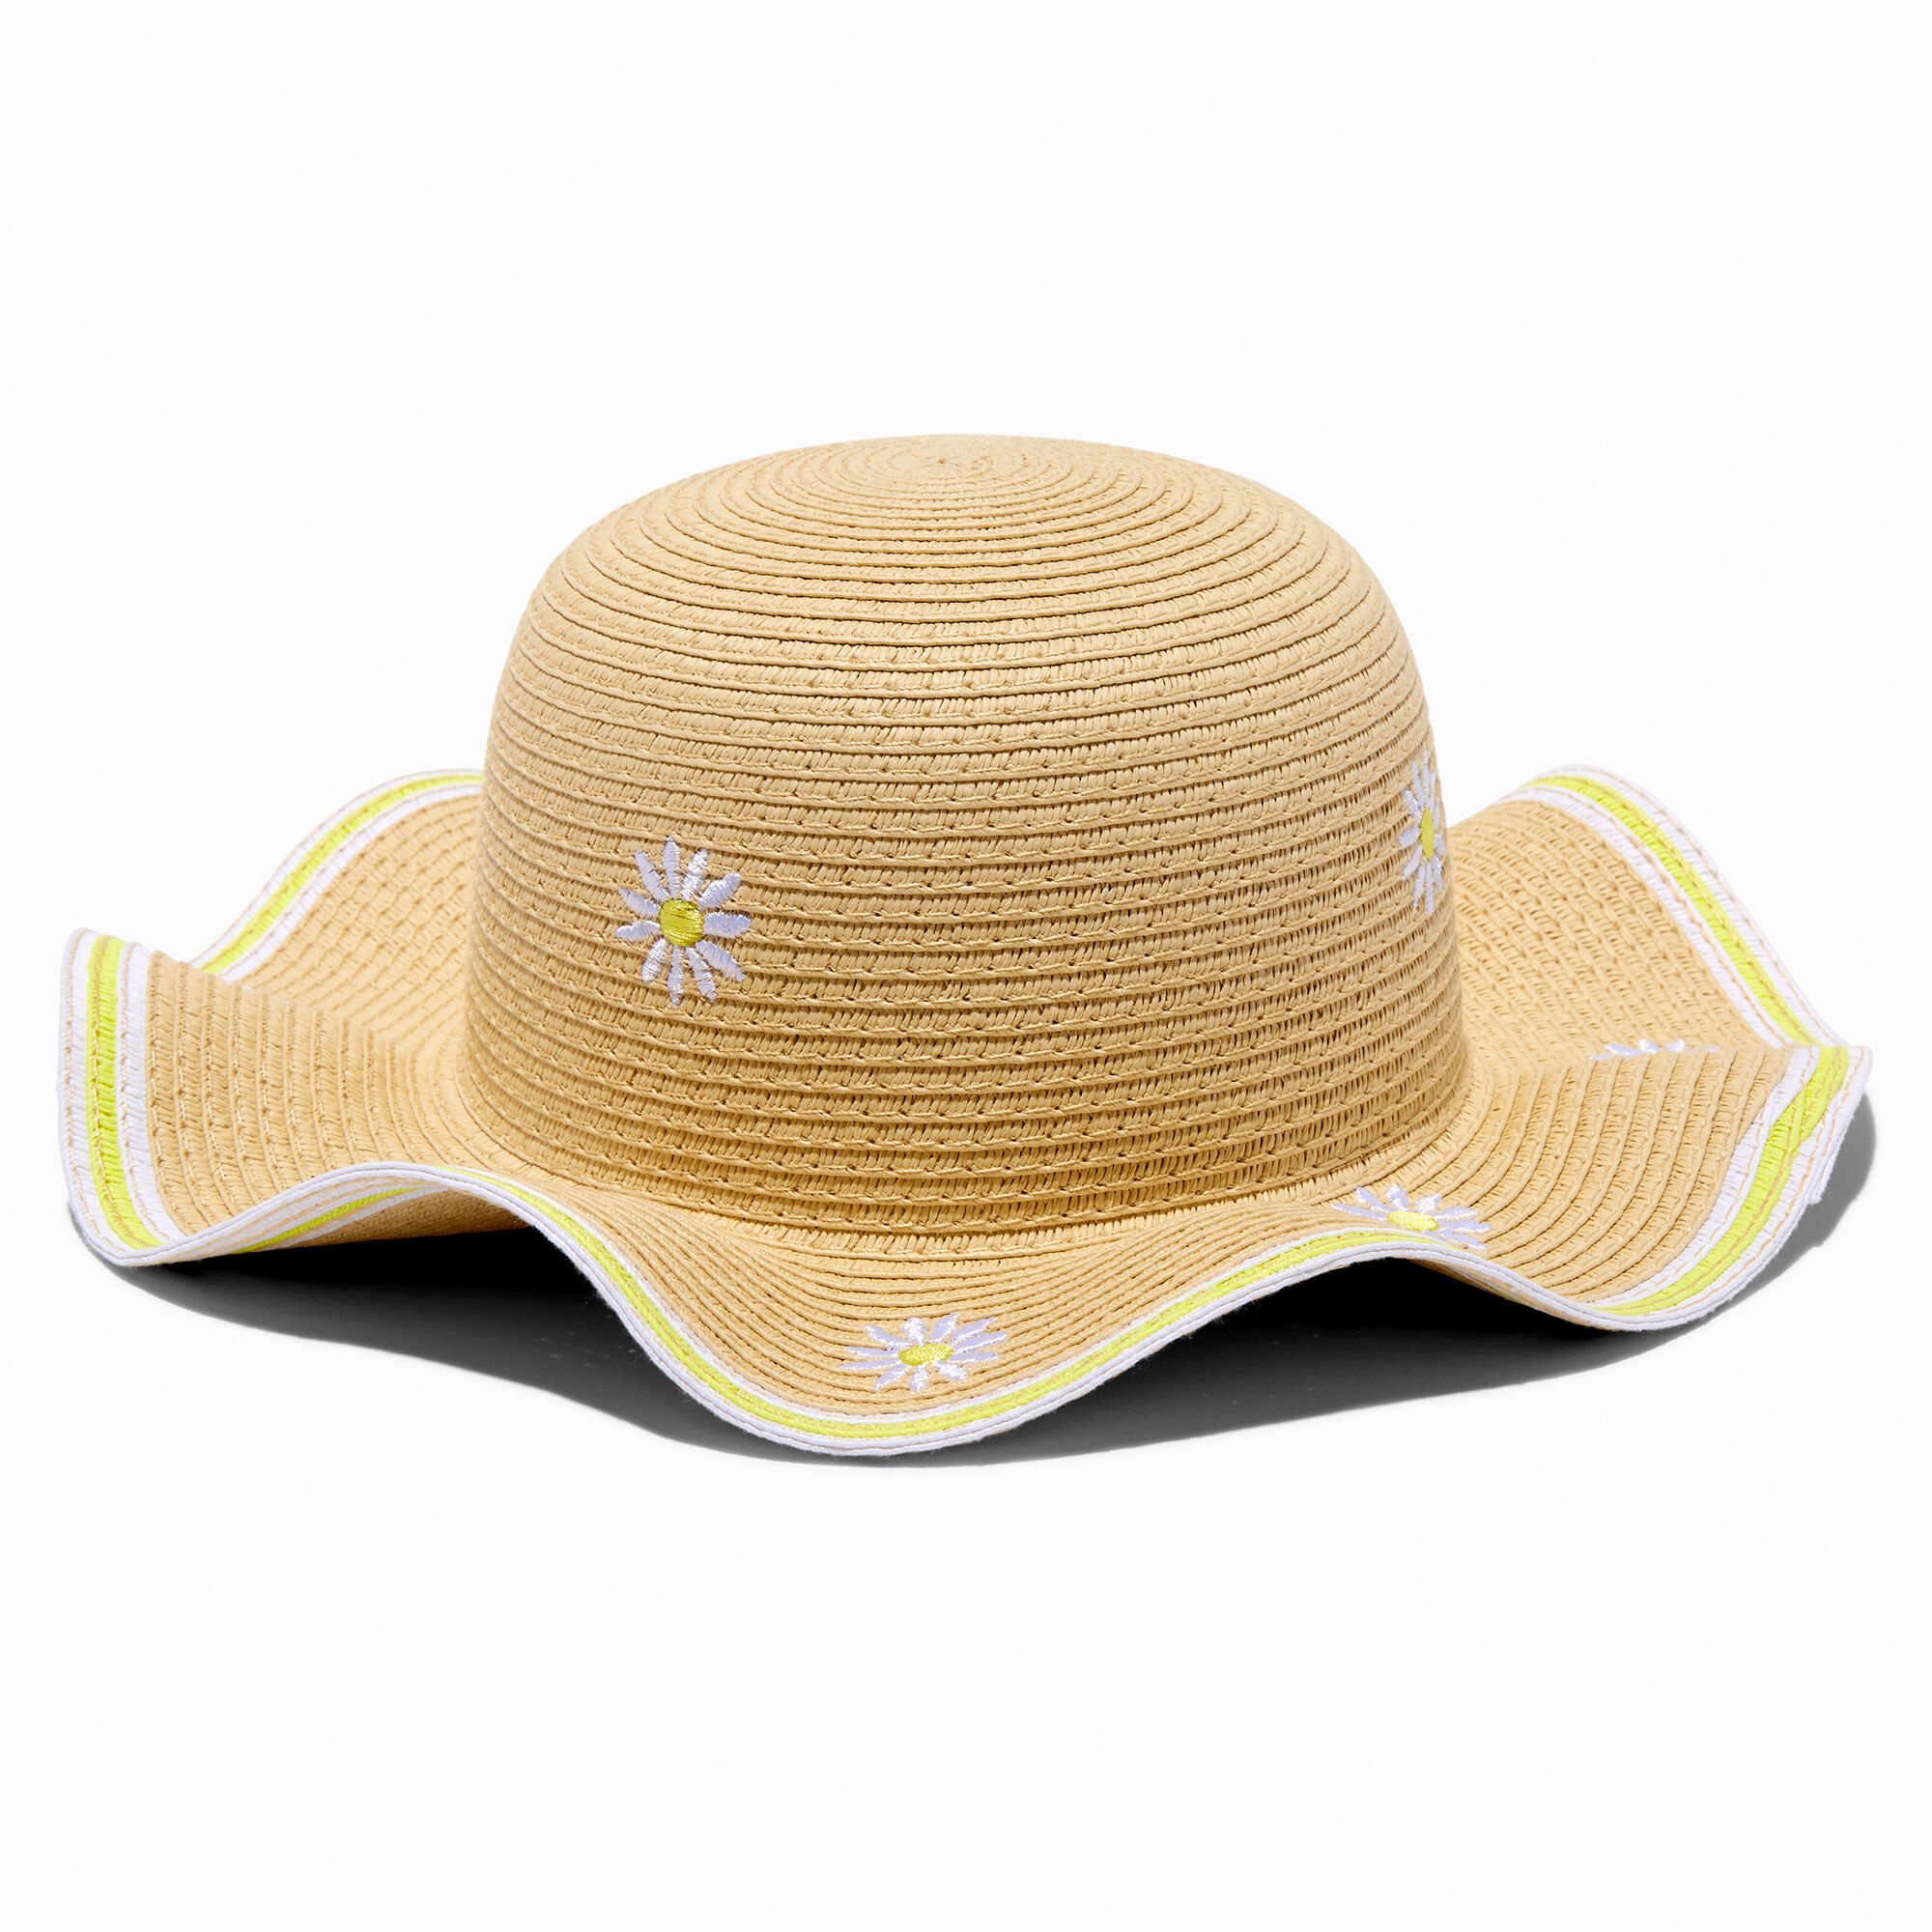 View Claires Club Floral Floppy Straw Hat information